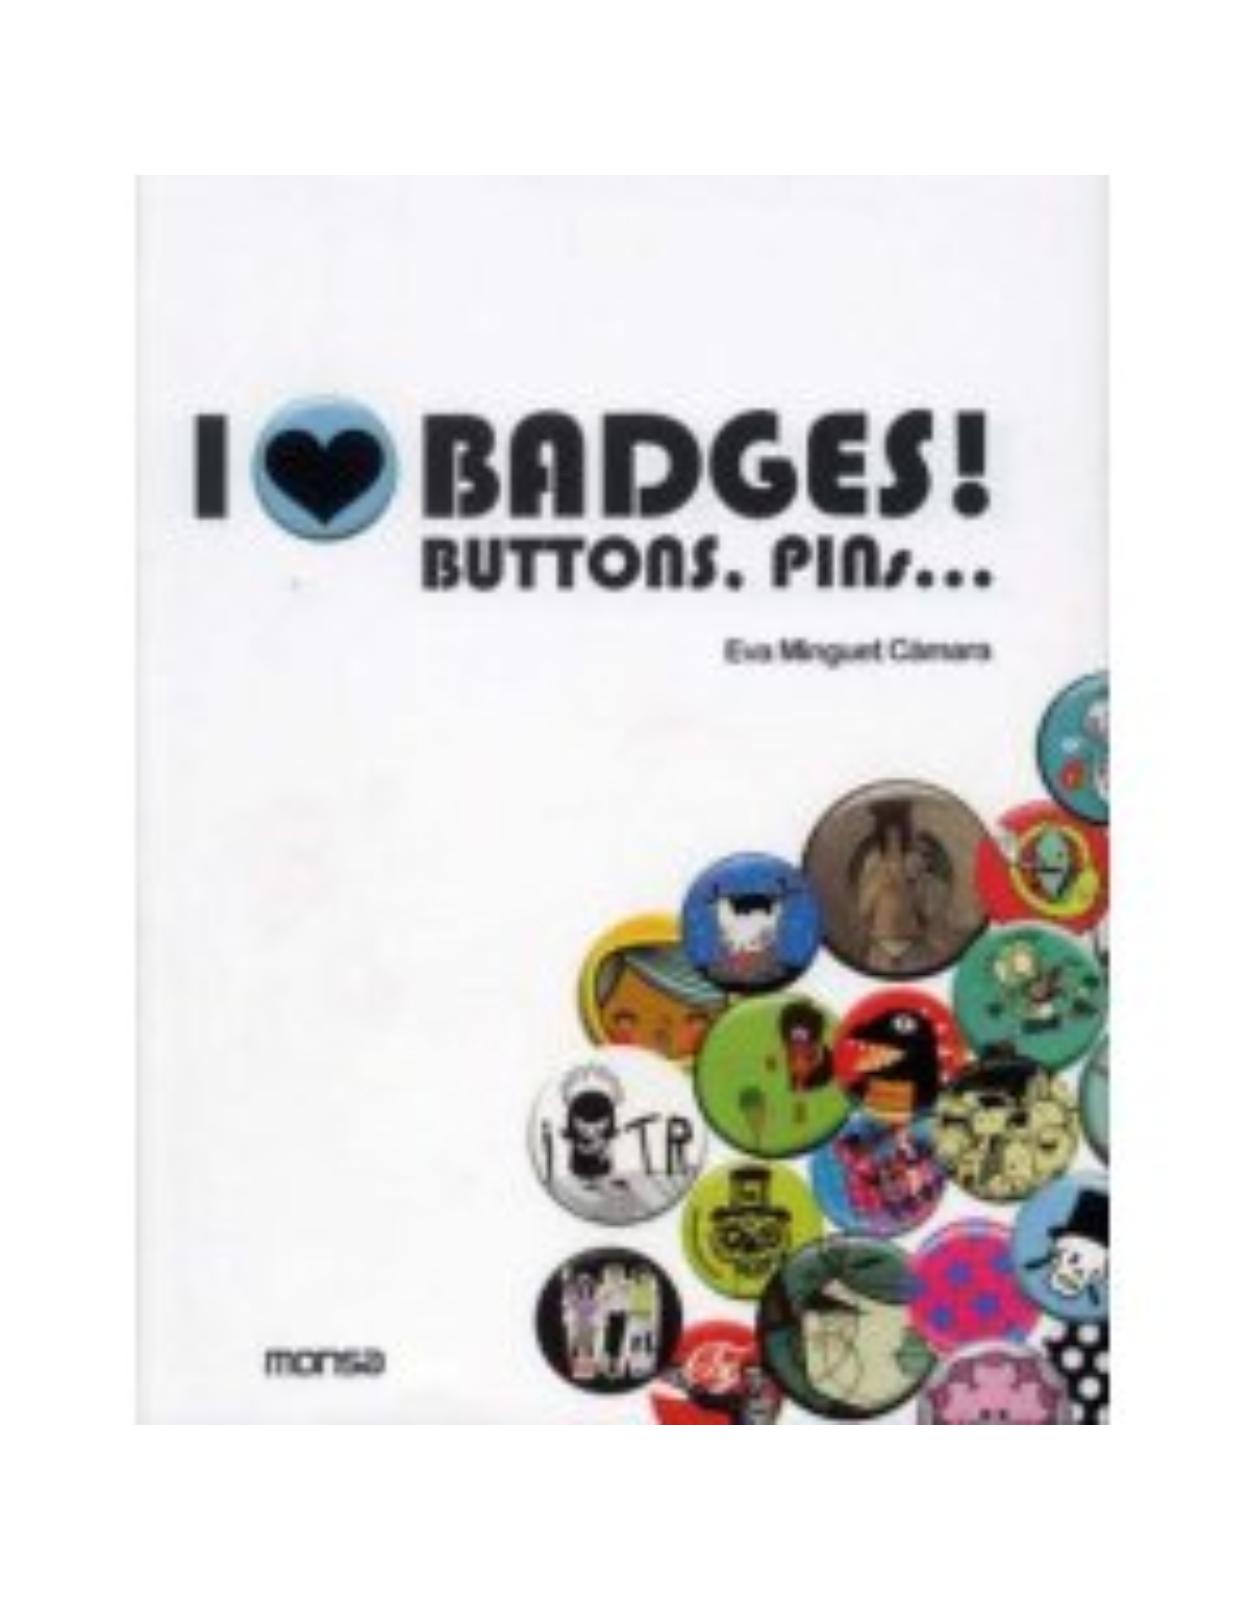 I love badges ! Buttons. Pins...